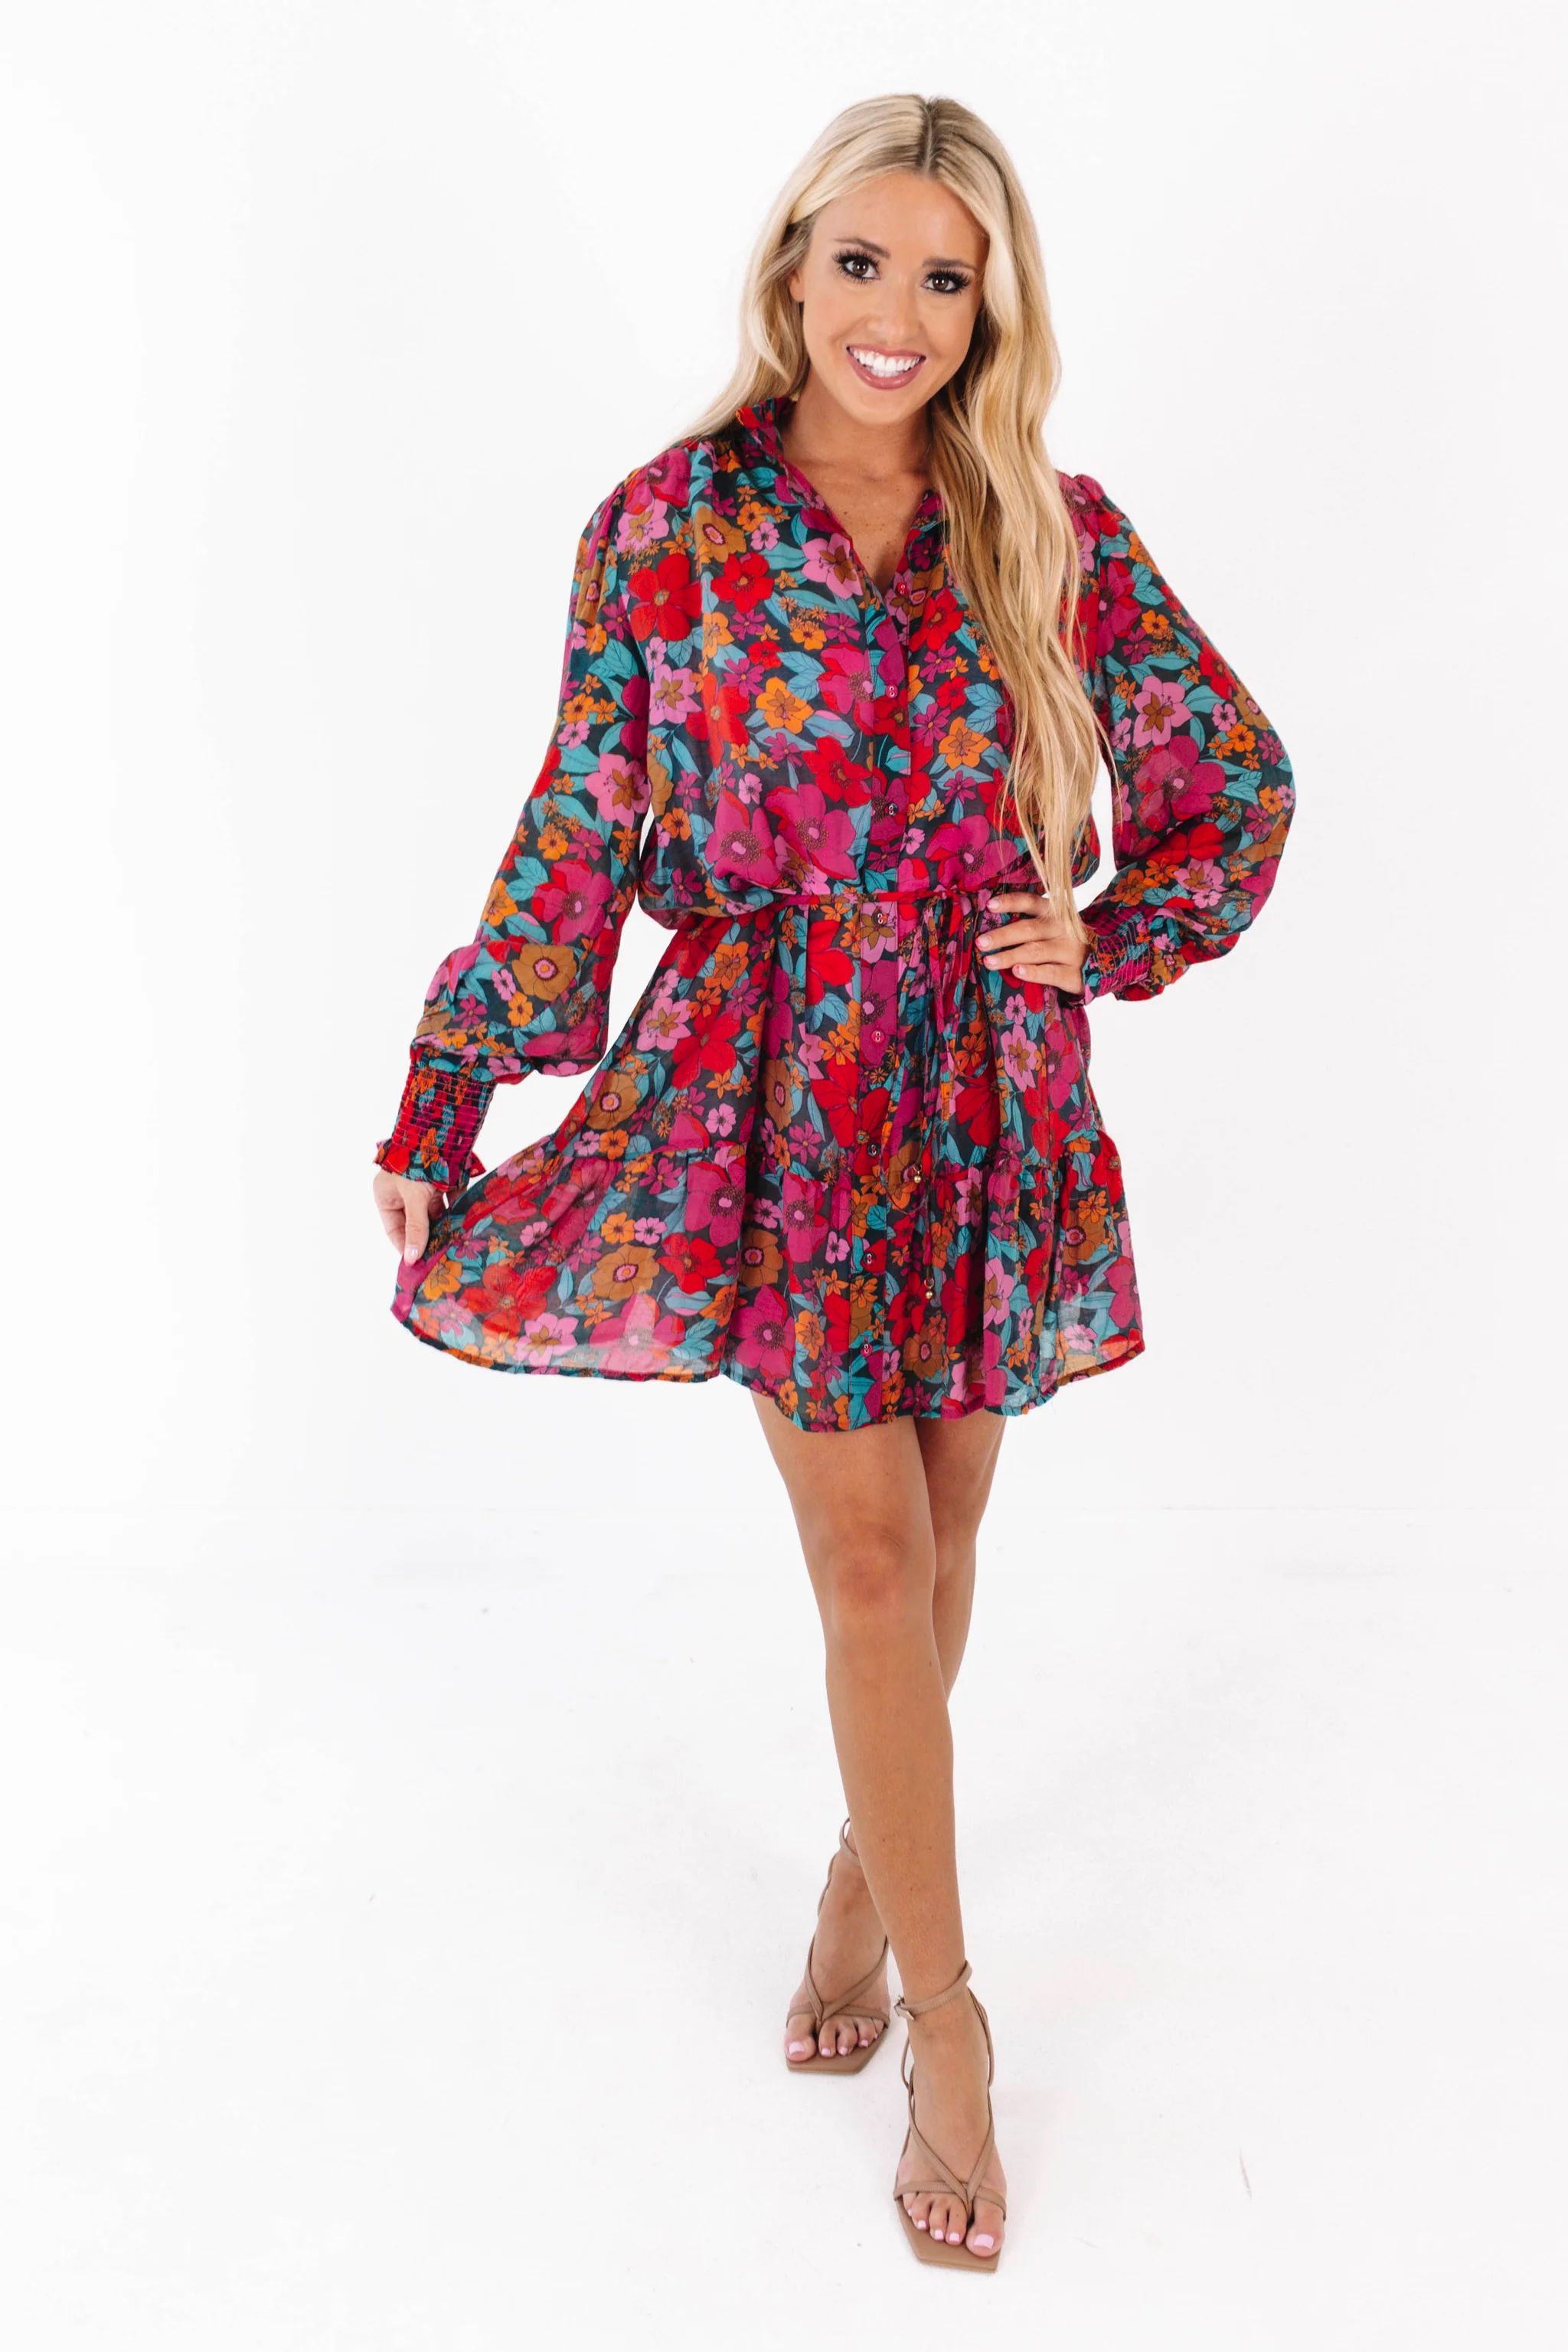 Fall in Love Dress - Multi | The Impeccable Pig